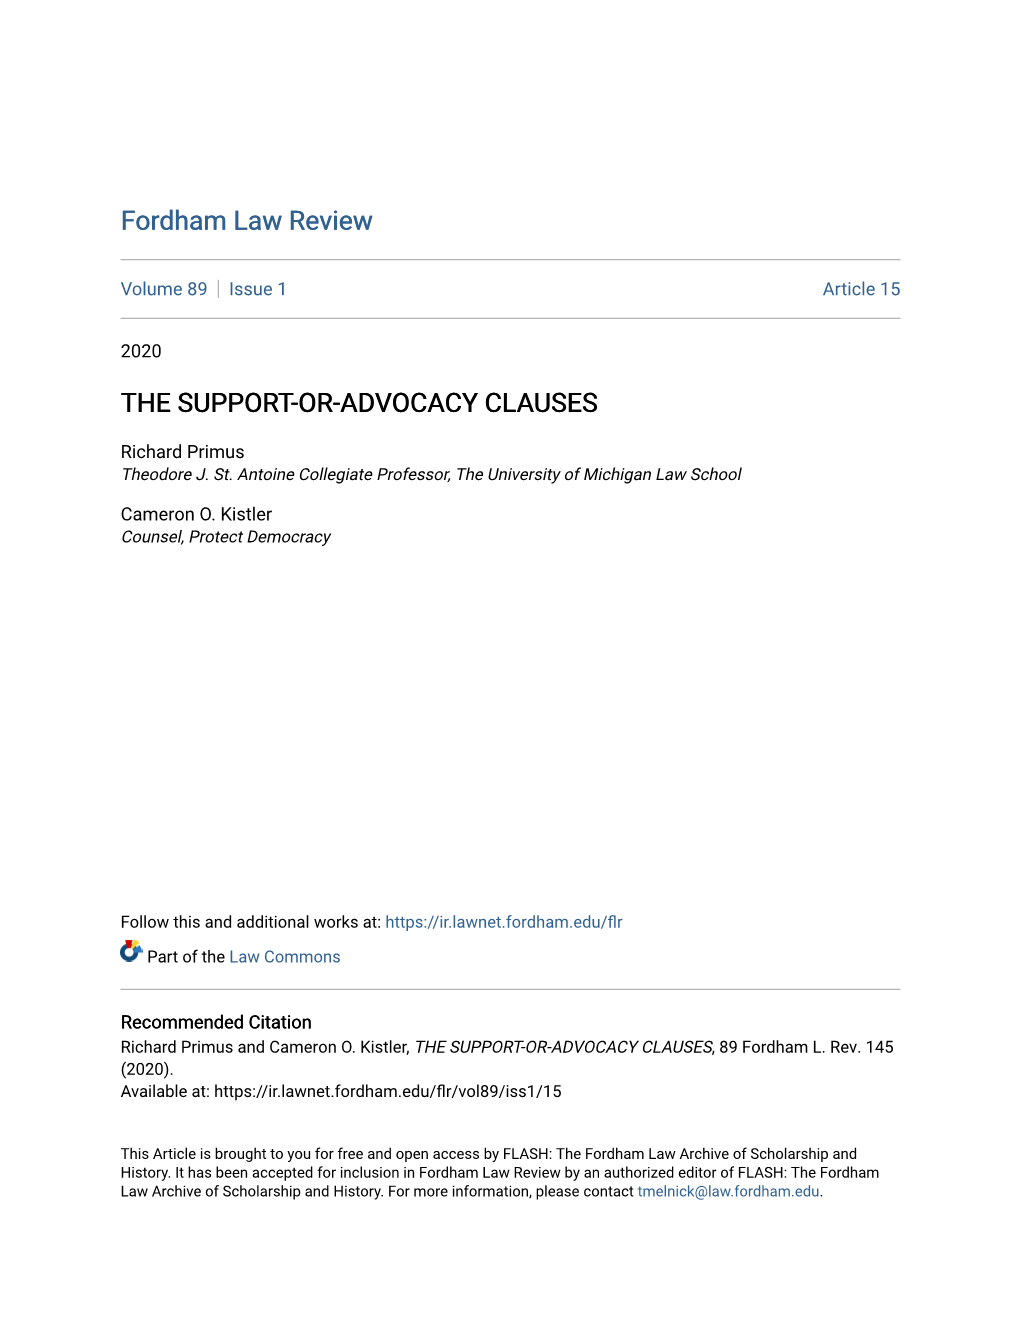 The Support-Or-Advocacy Clauses